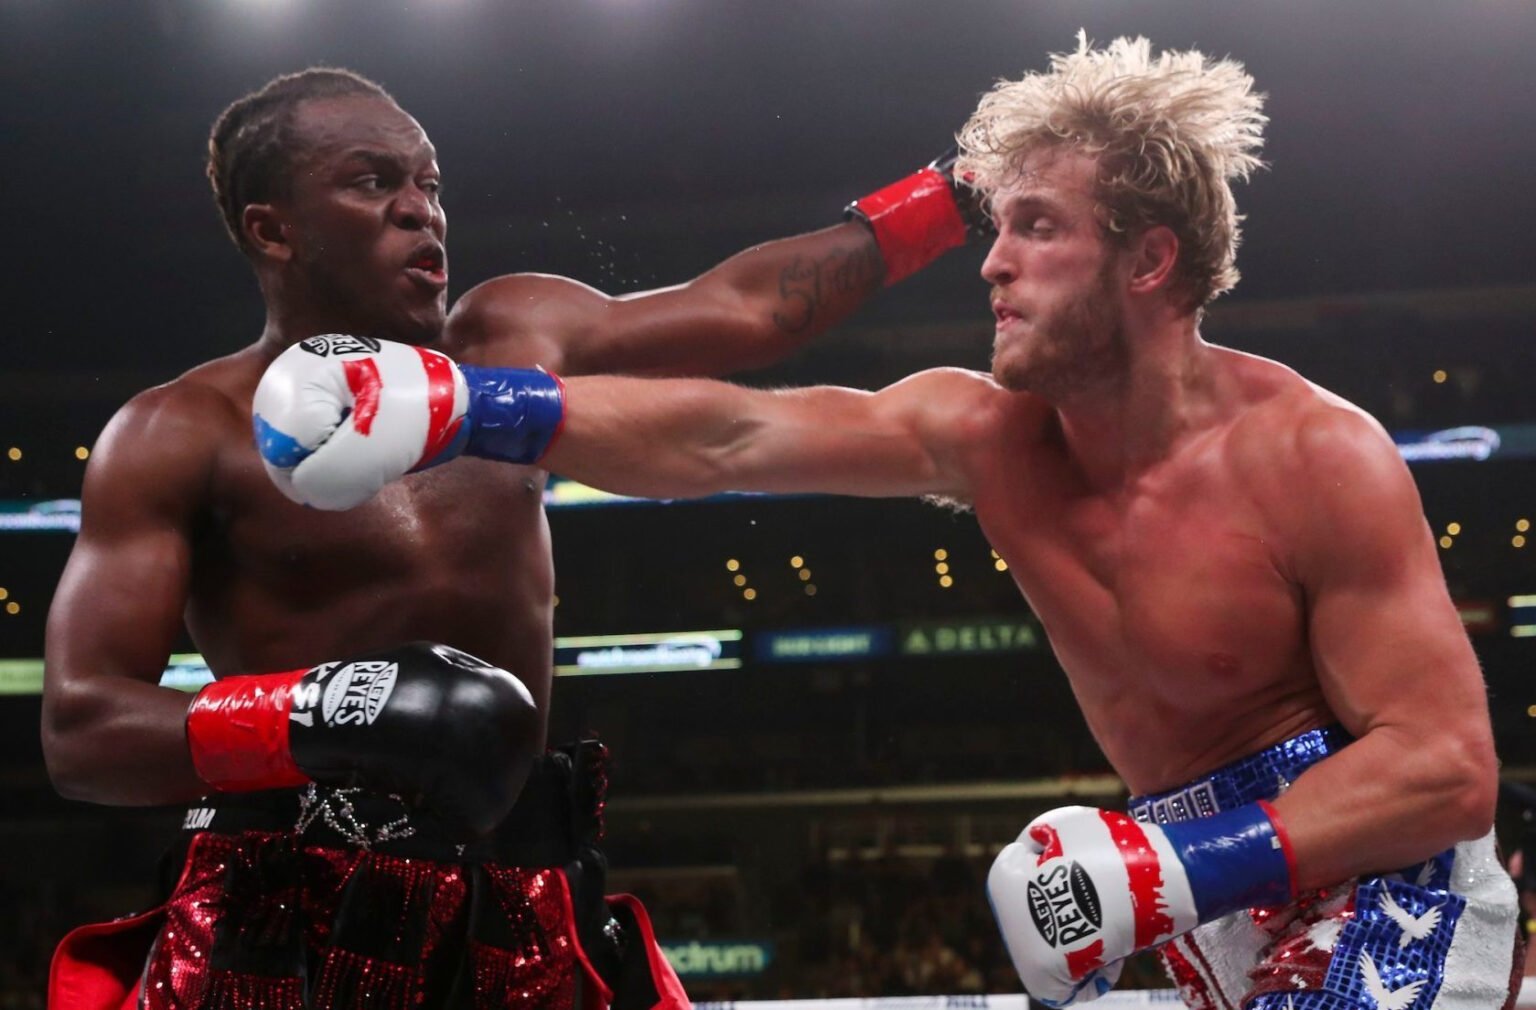 What's the status of the big fight tonight? Will Logan Paul and Floyd Mayweather go head to head? Catch the latest updates on the match here!